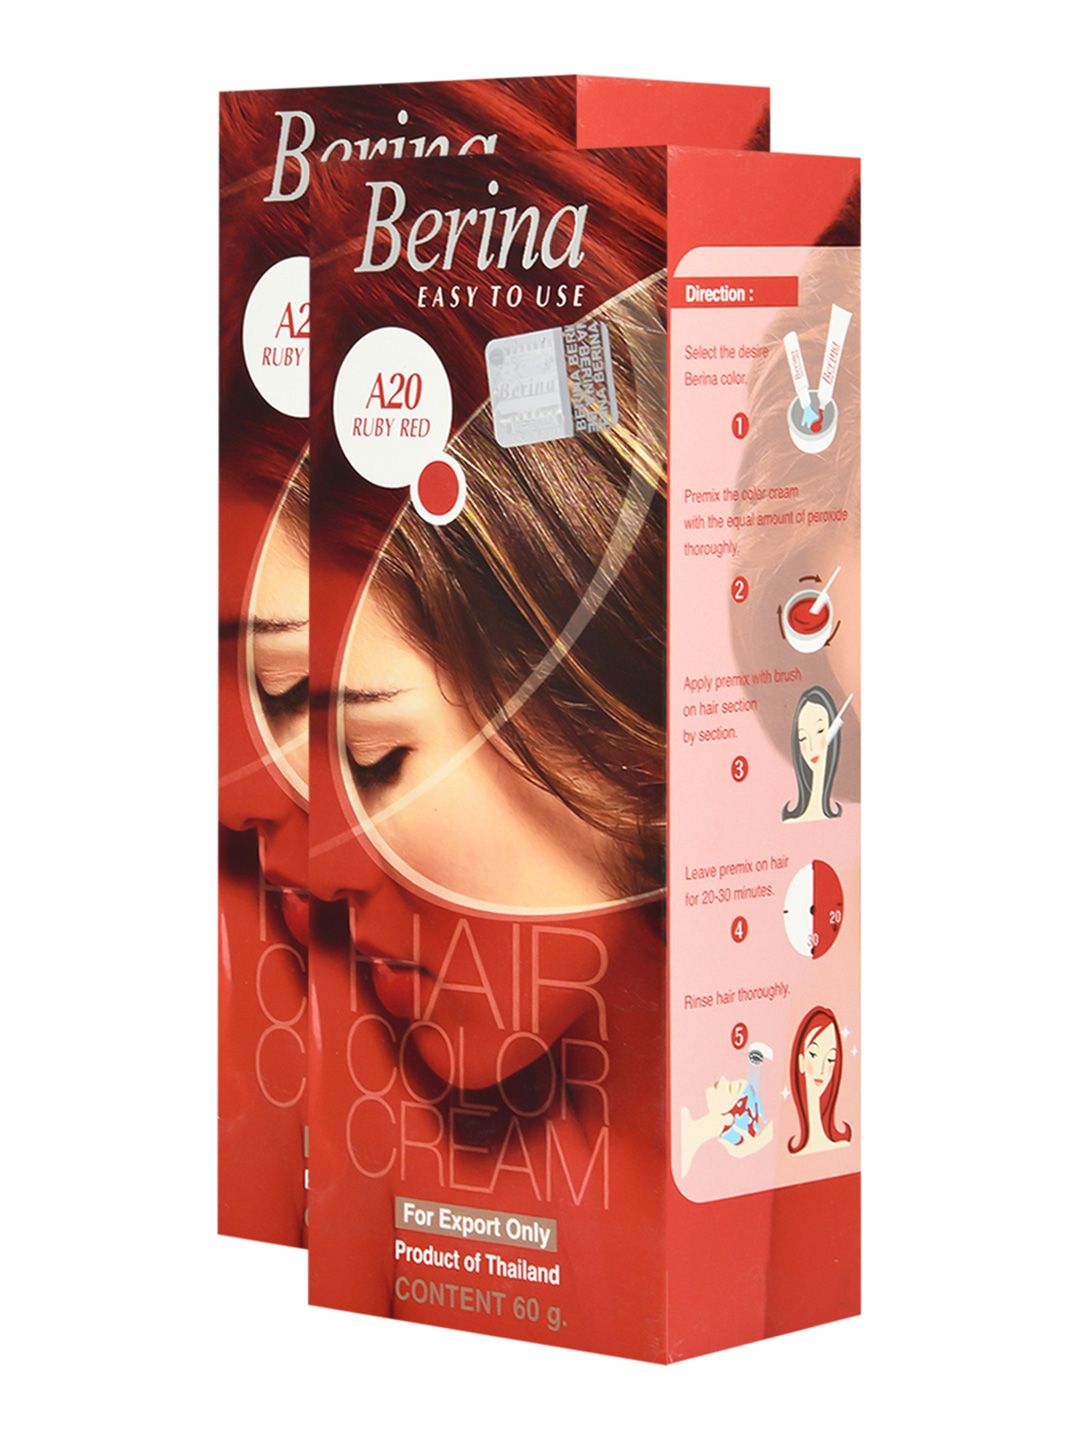 Berina Pack of 2 Hair Color Cream A20 Ruby Red Price in India